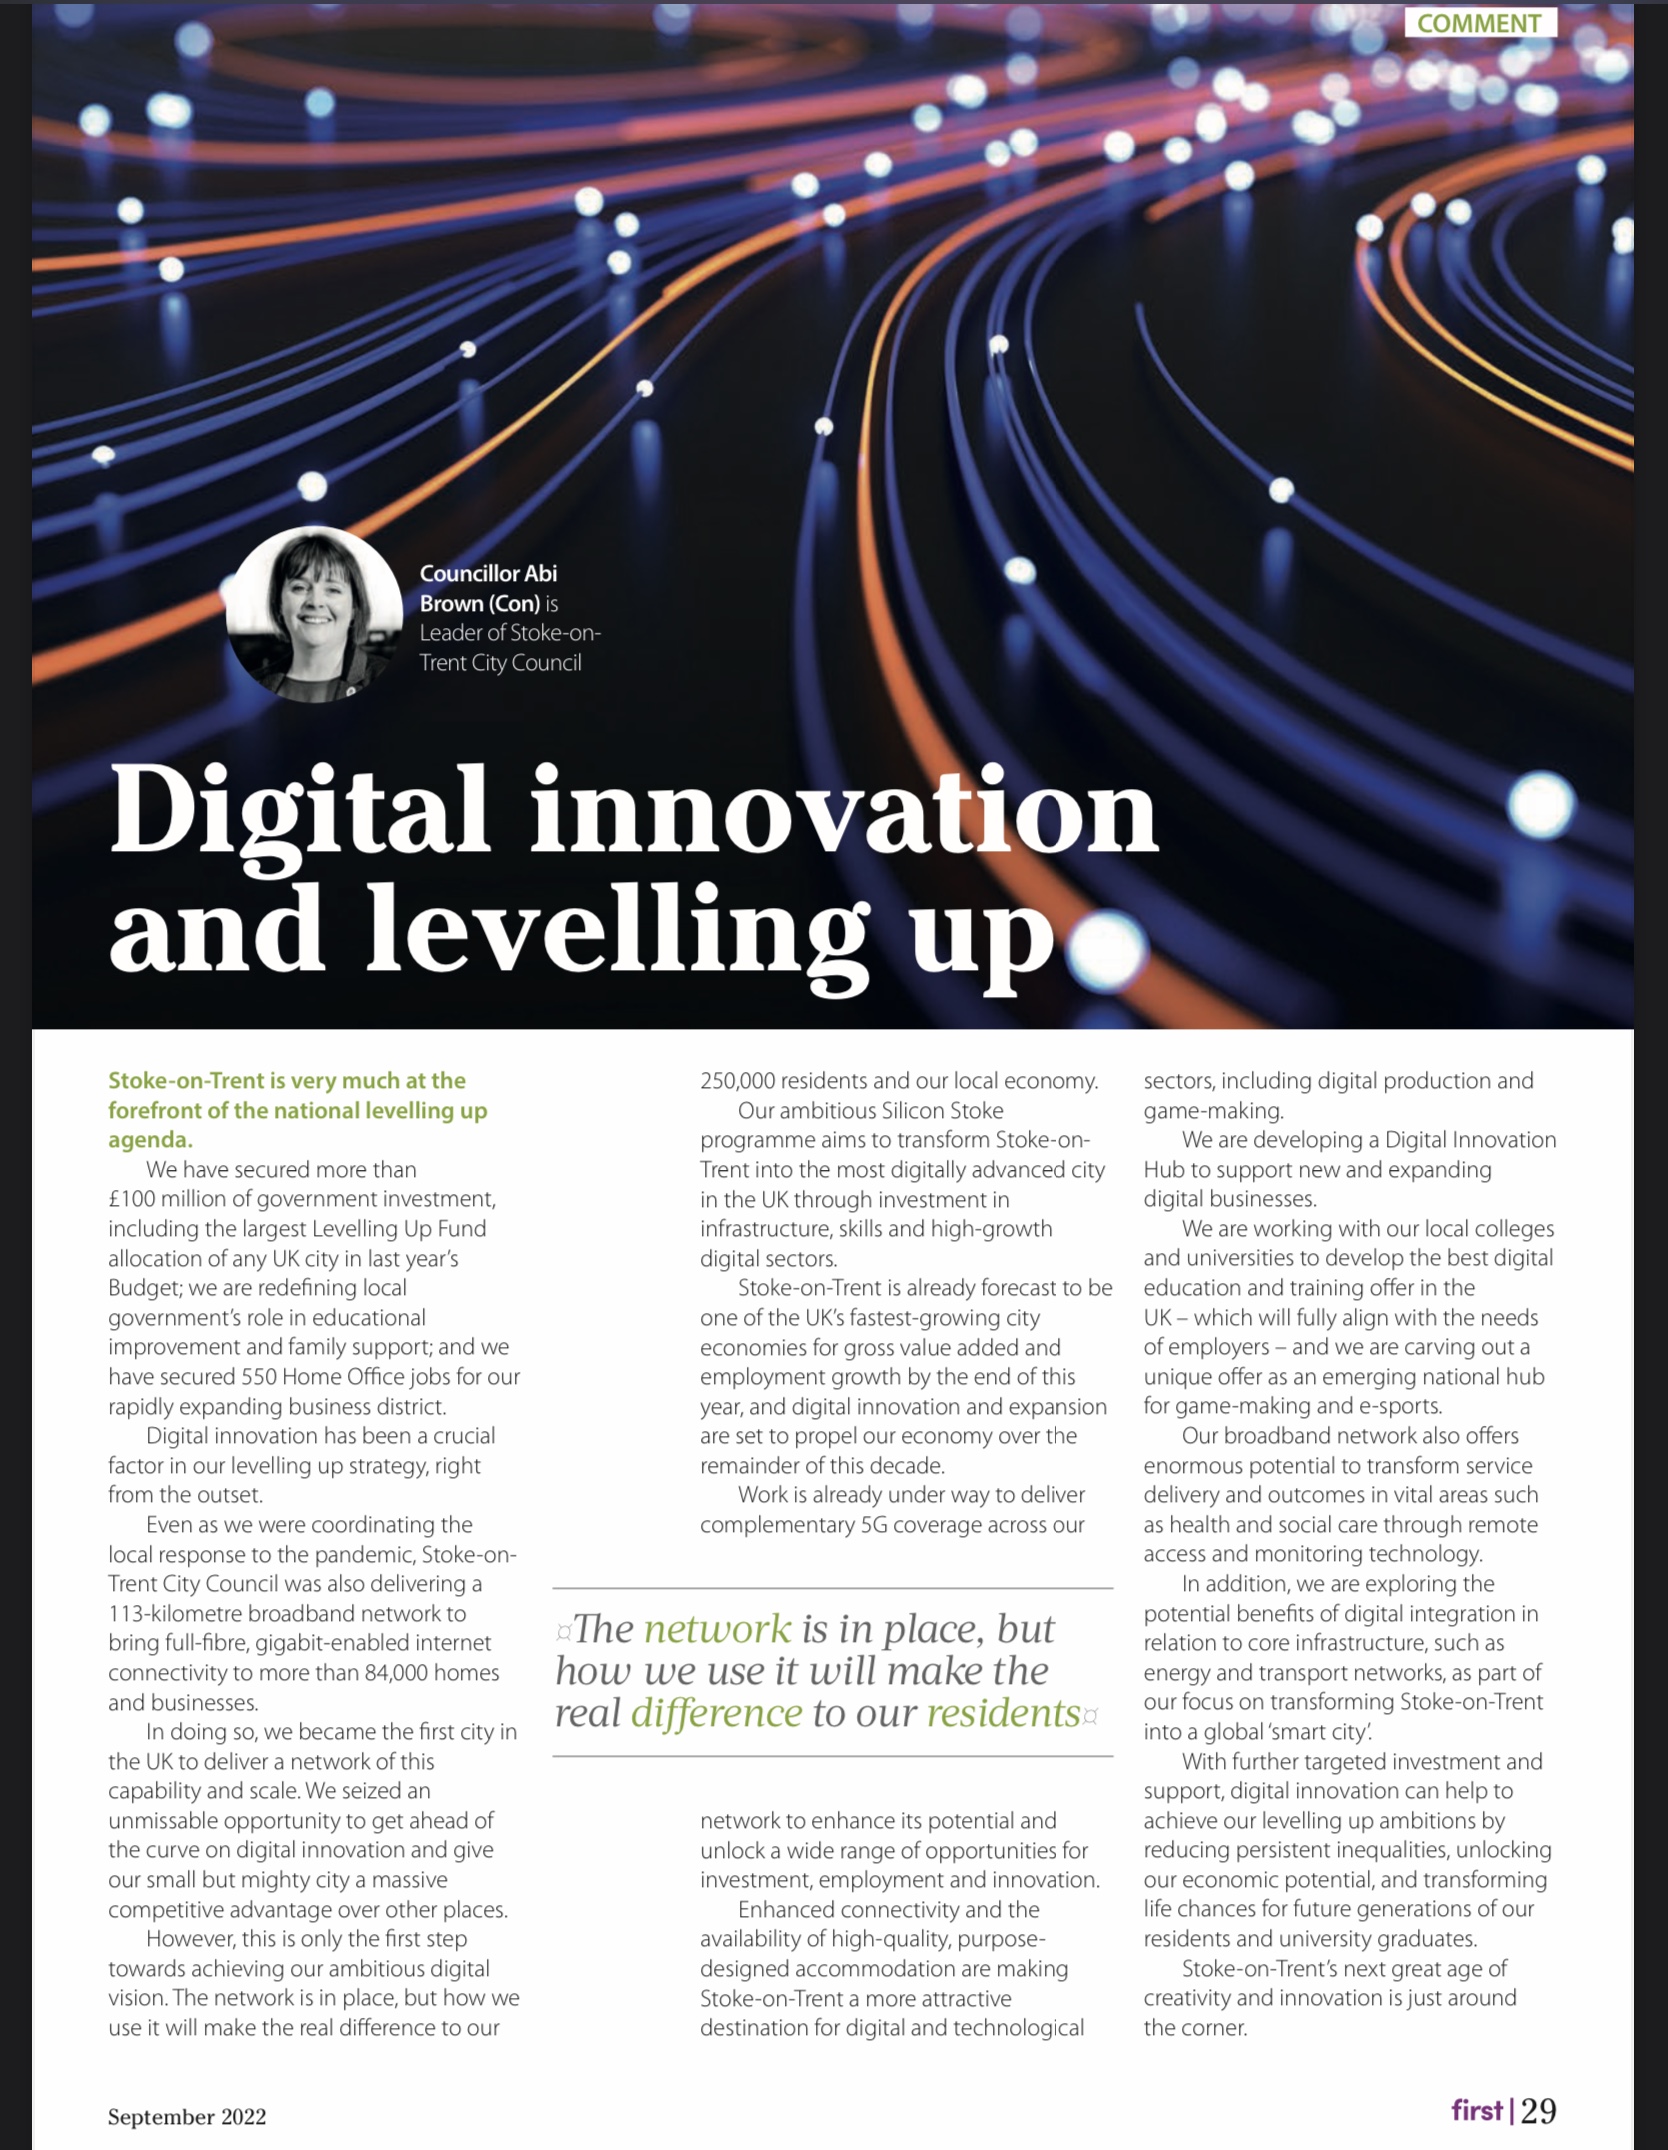 LGA First article on Digital Innovation and Levelling Up